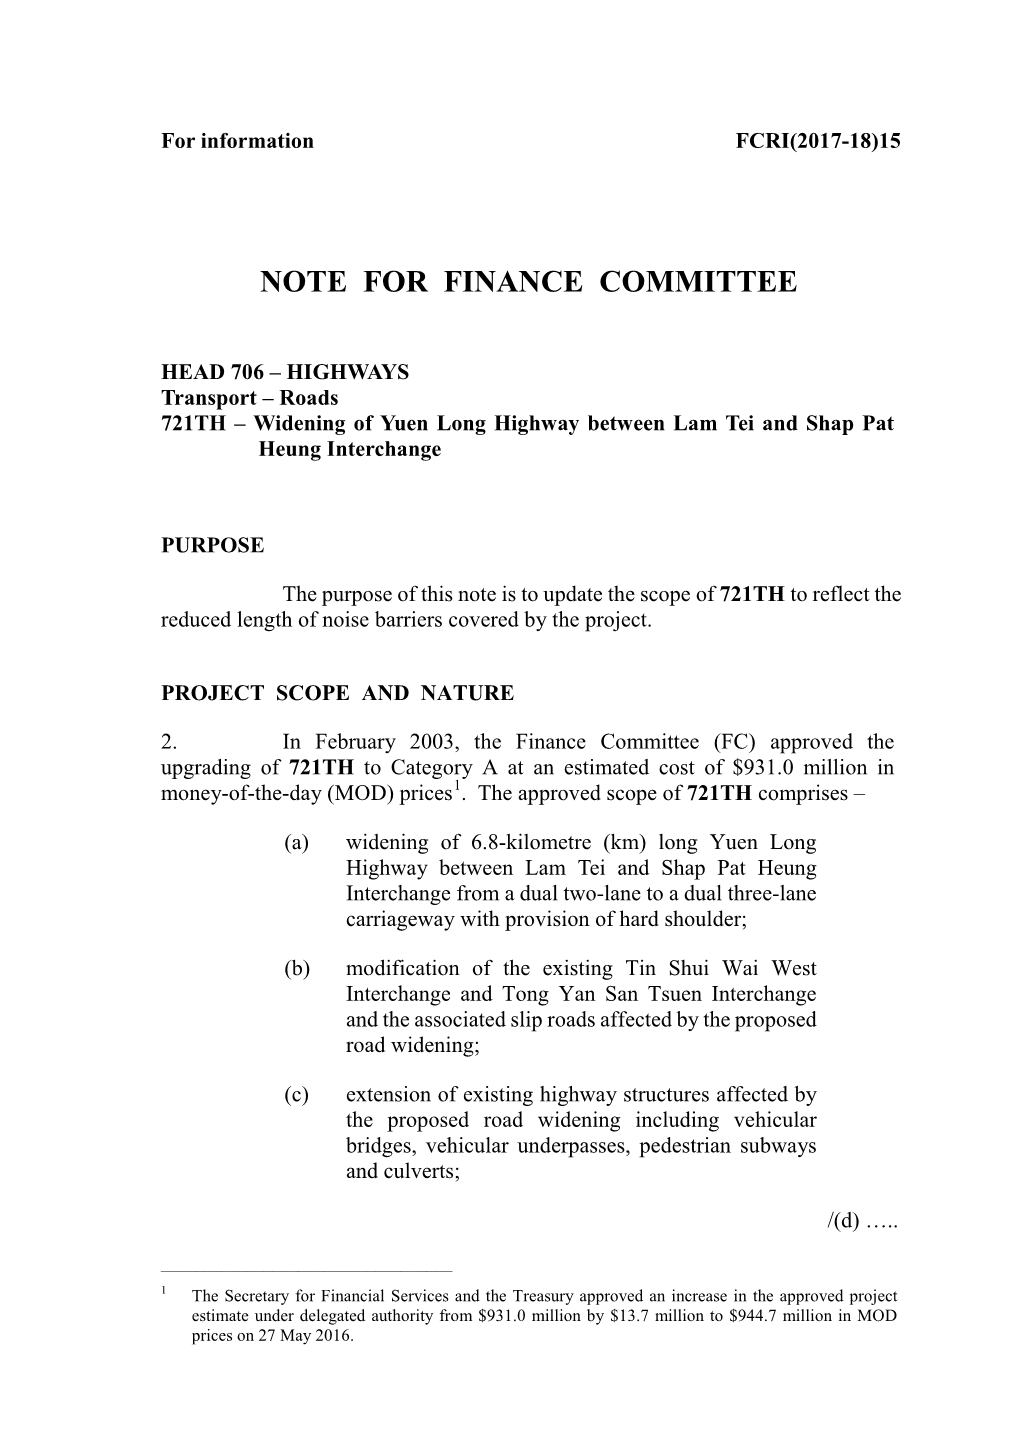 Note for Finance Committee